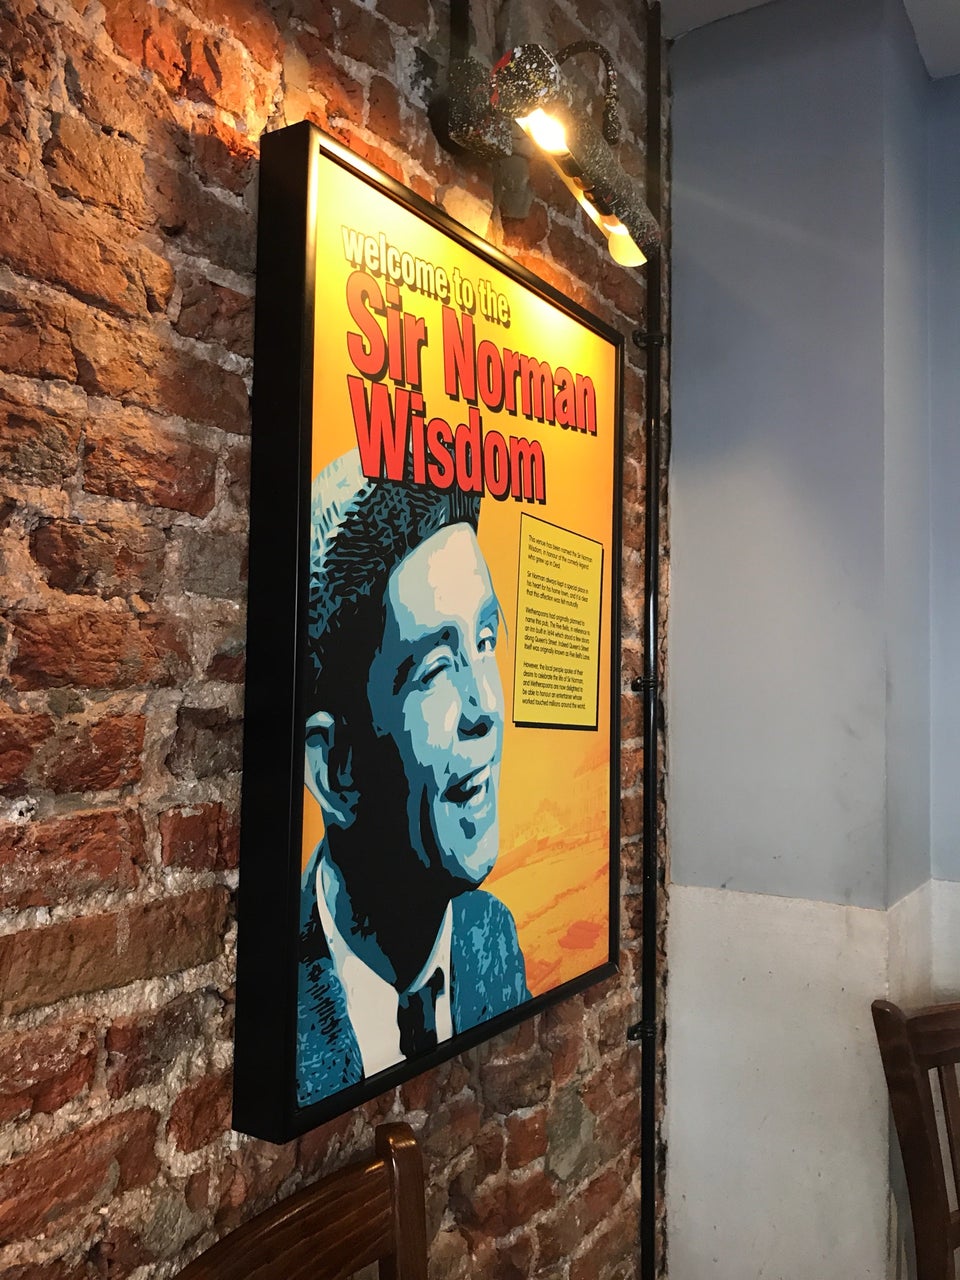 The Sir Norman Wisdom - JD Wetherspoon